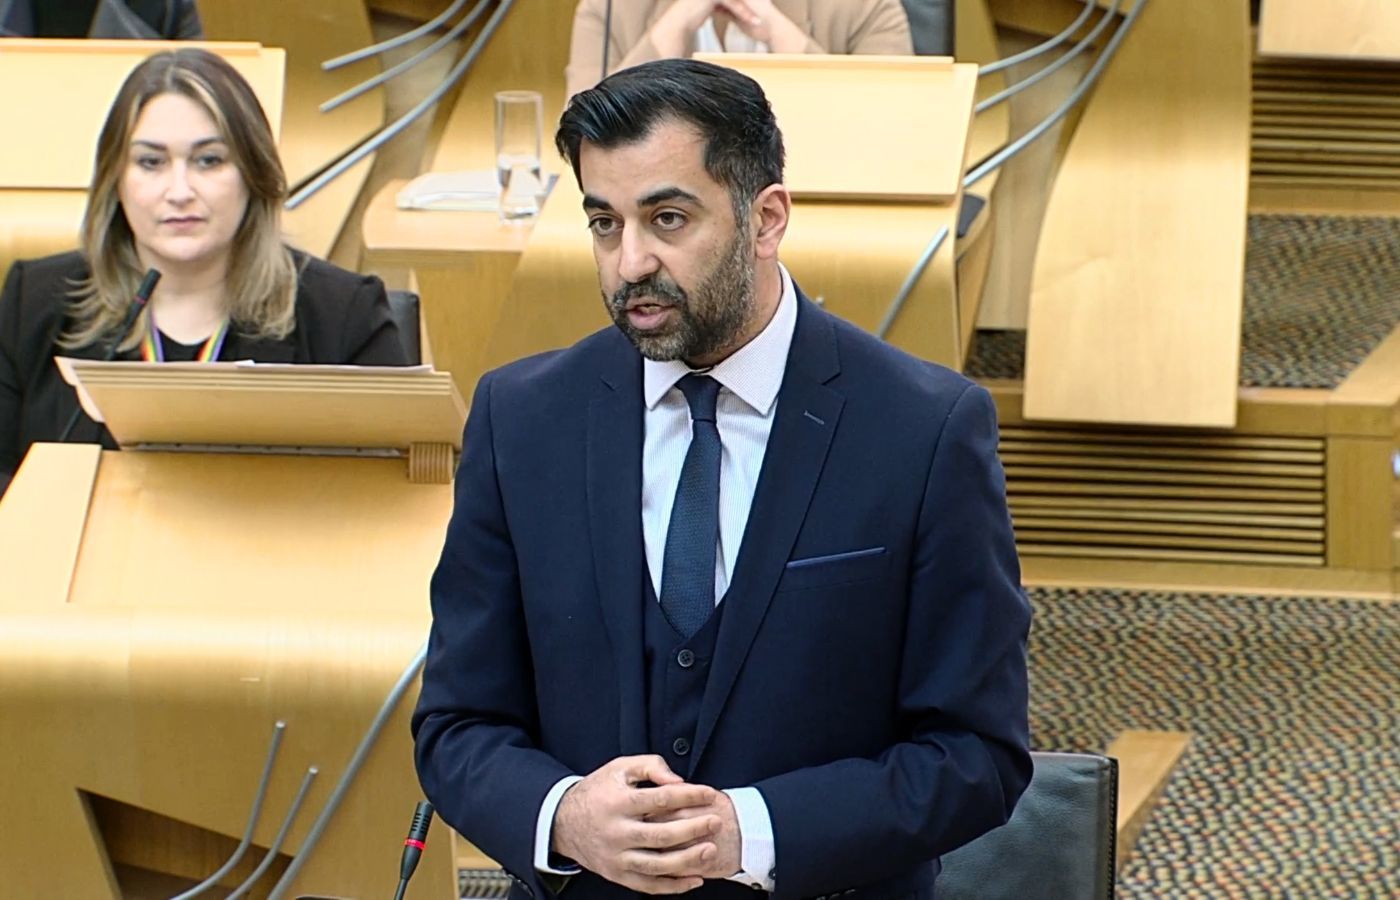 Humza Yousaf has said the use of a Section 35 order is 'undemocratic'.